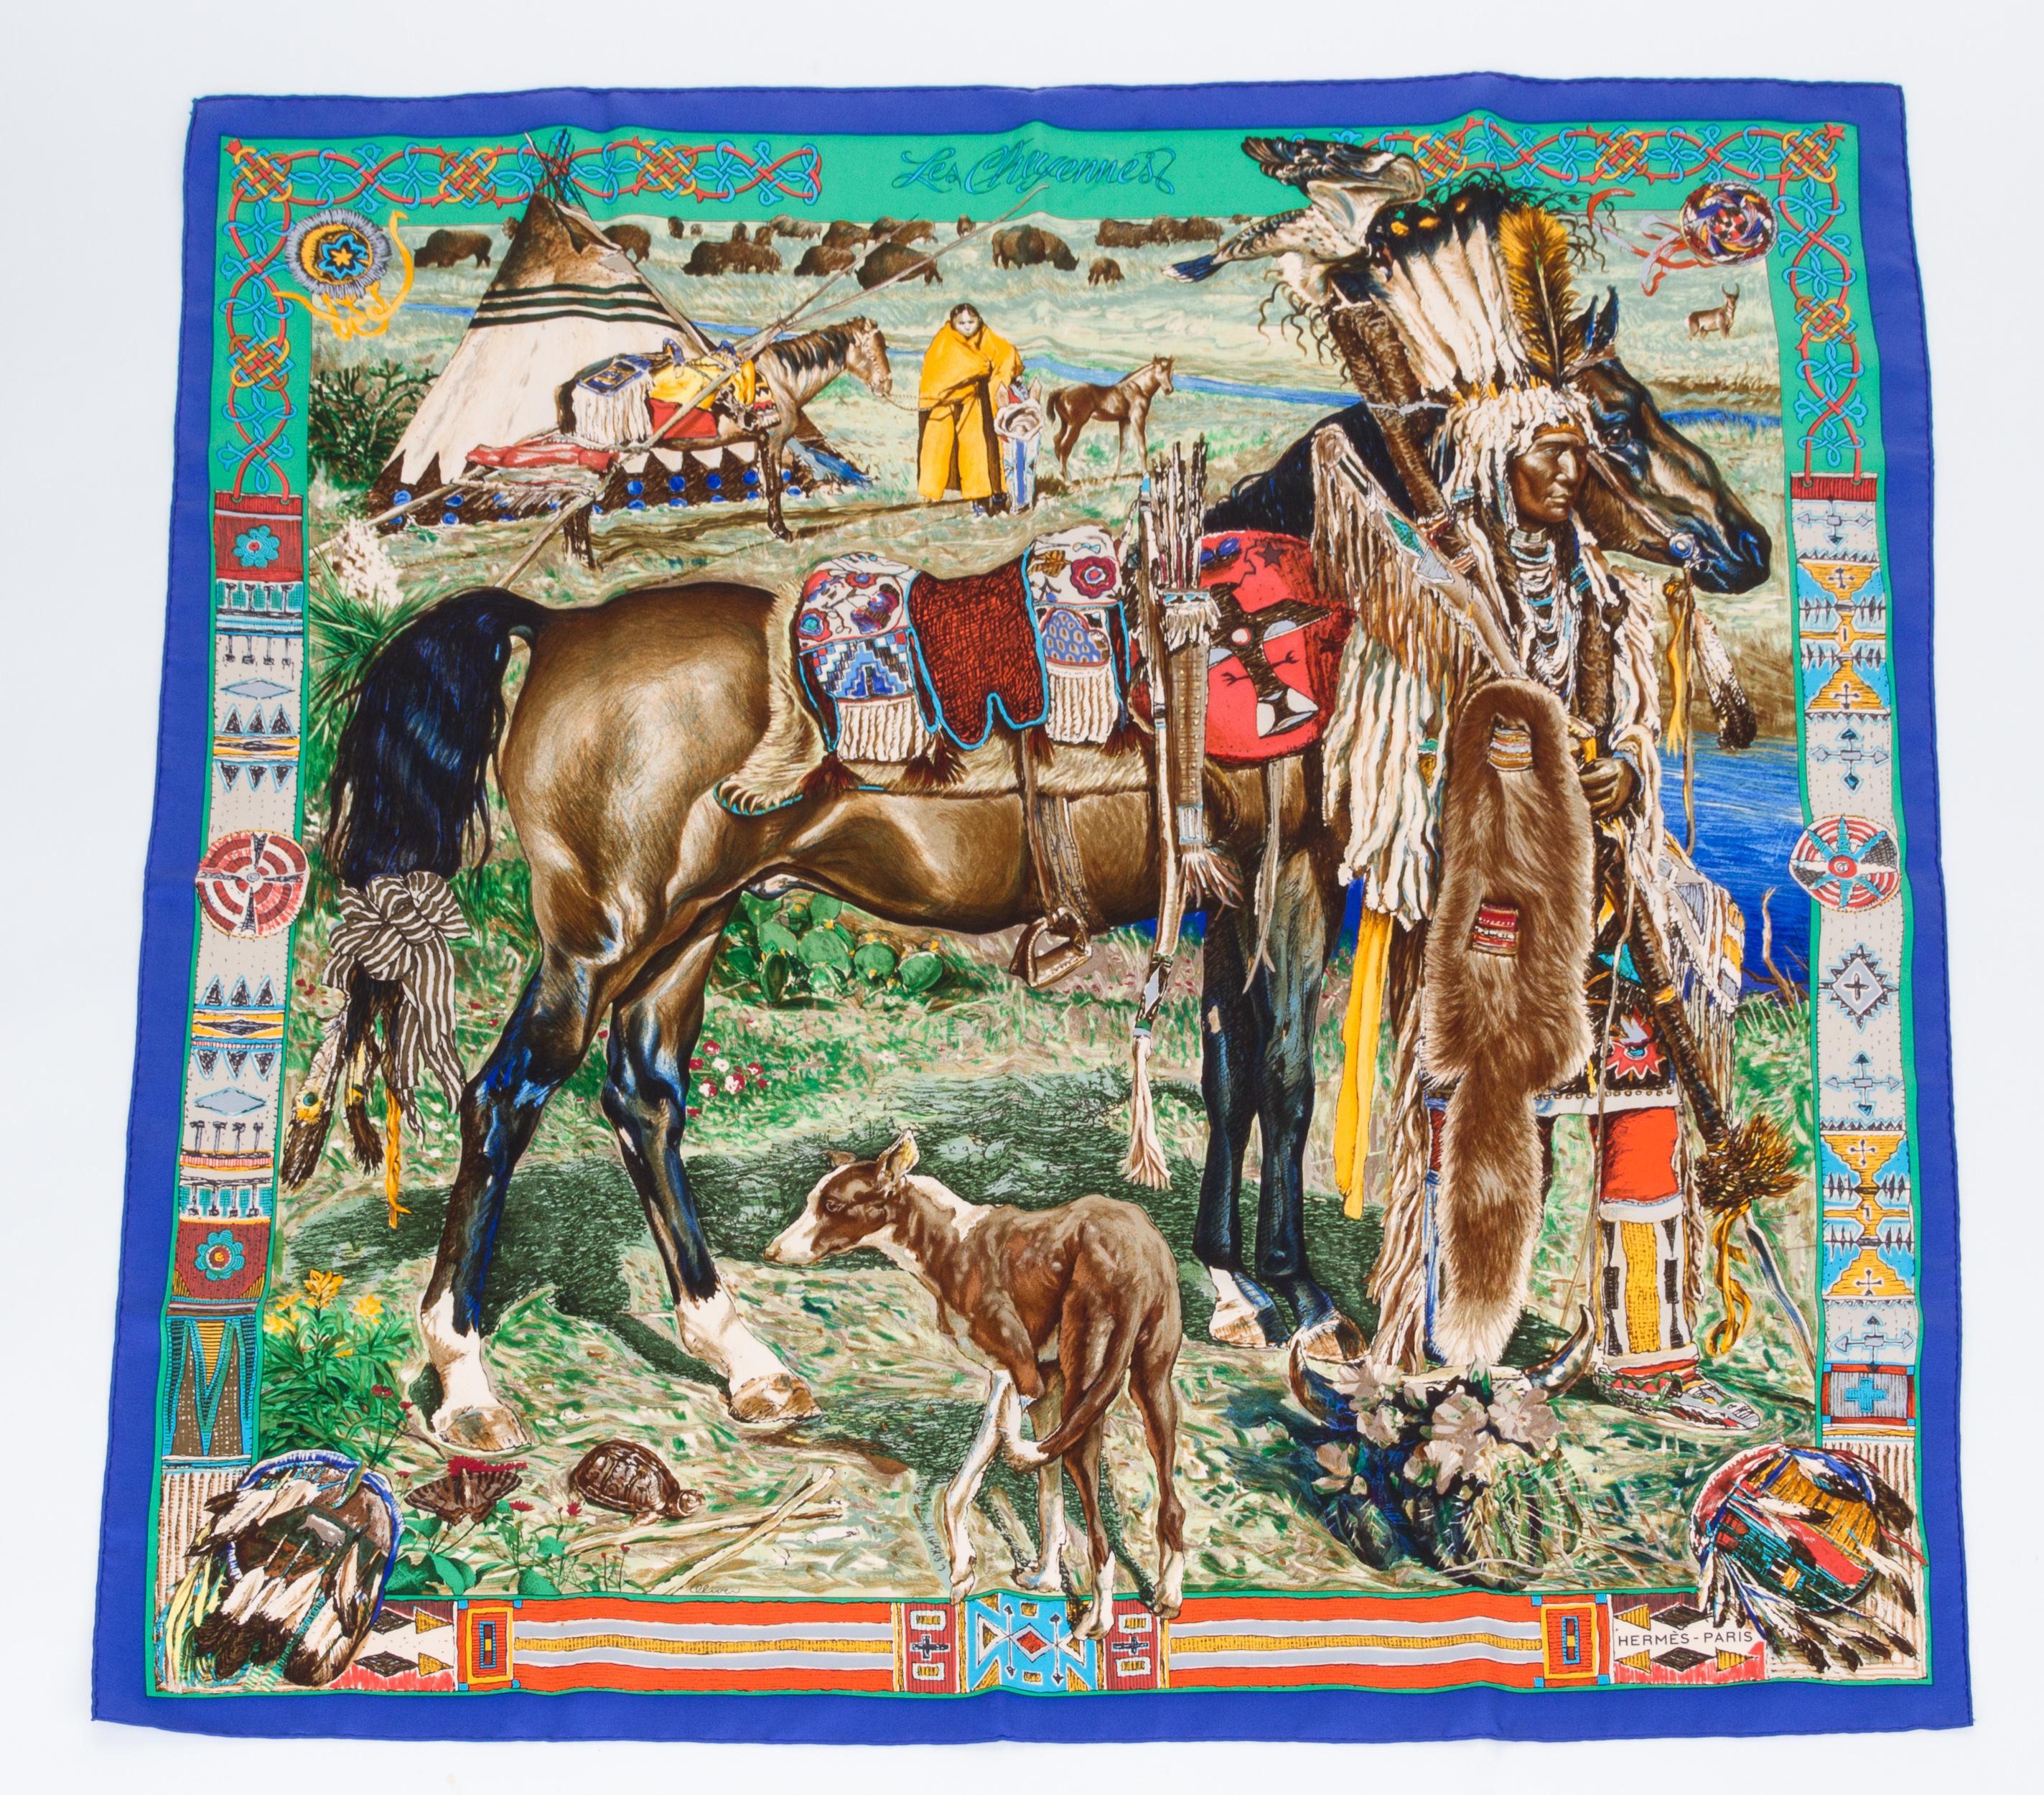 Collectible Hermès Les Cheyennes 100% silk twill scarf by Kermit Oliver. Vibrant colorways depicting a Native American scene. Hand-rolled edges. Comes with original box.
